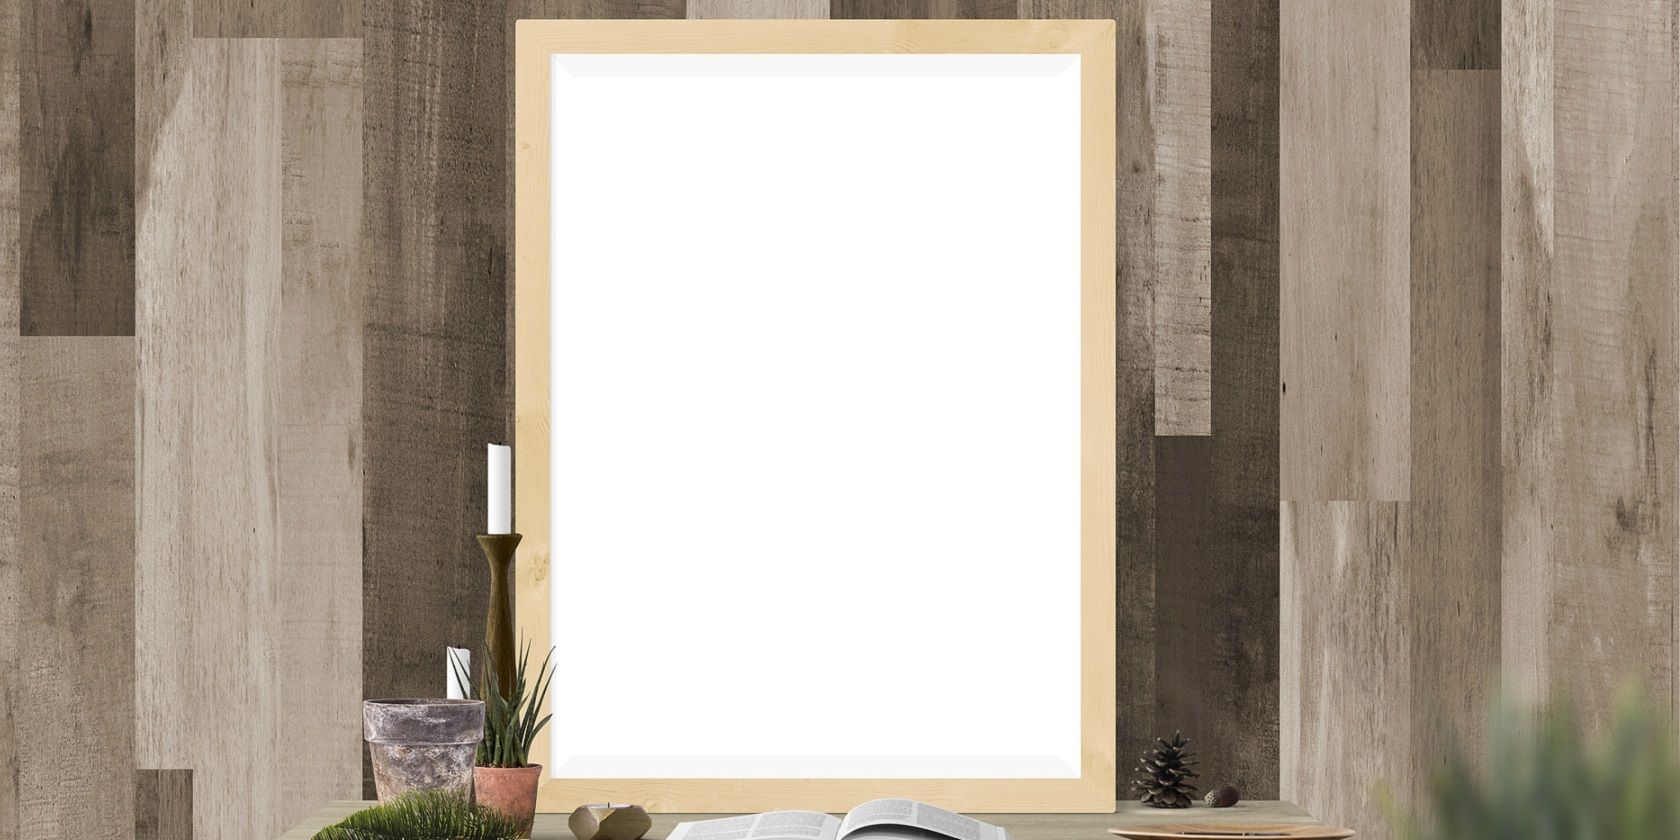 a picture frame cover image